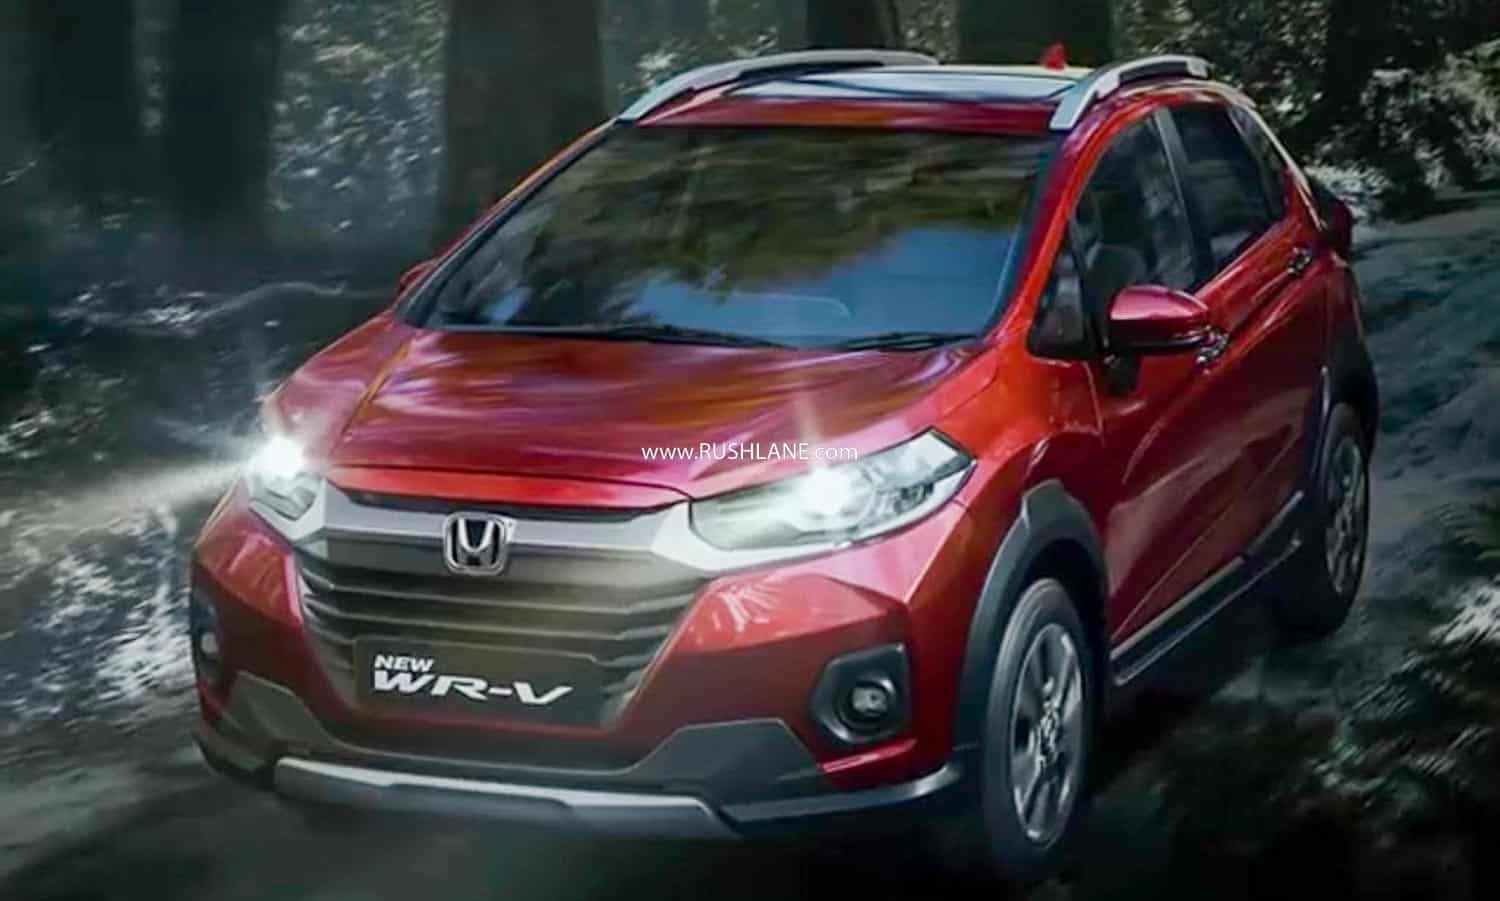 Honda Wr V Bs6 Facelift Unveiled Ahead Of Imminent Launch